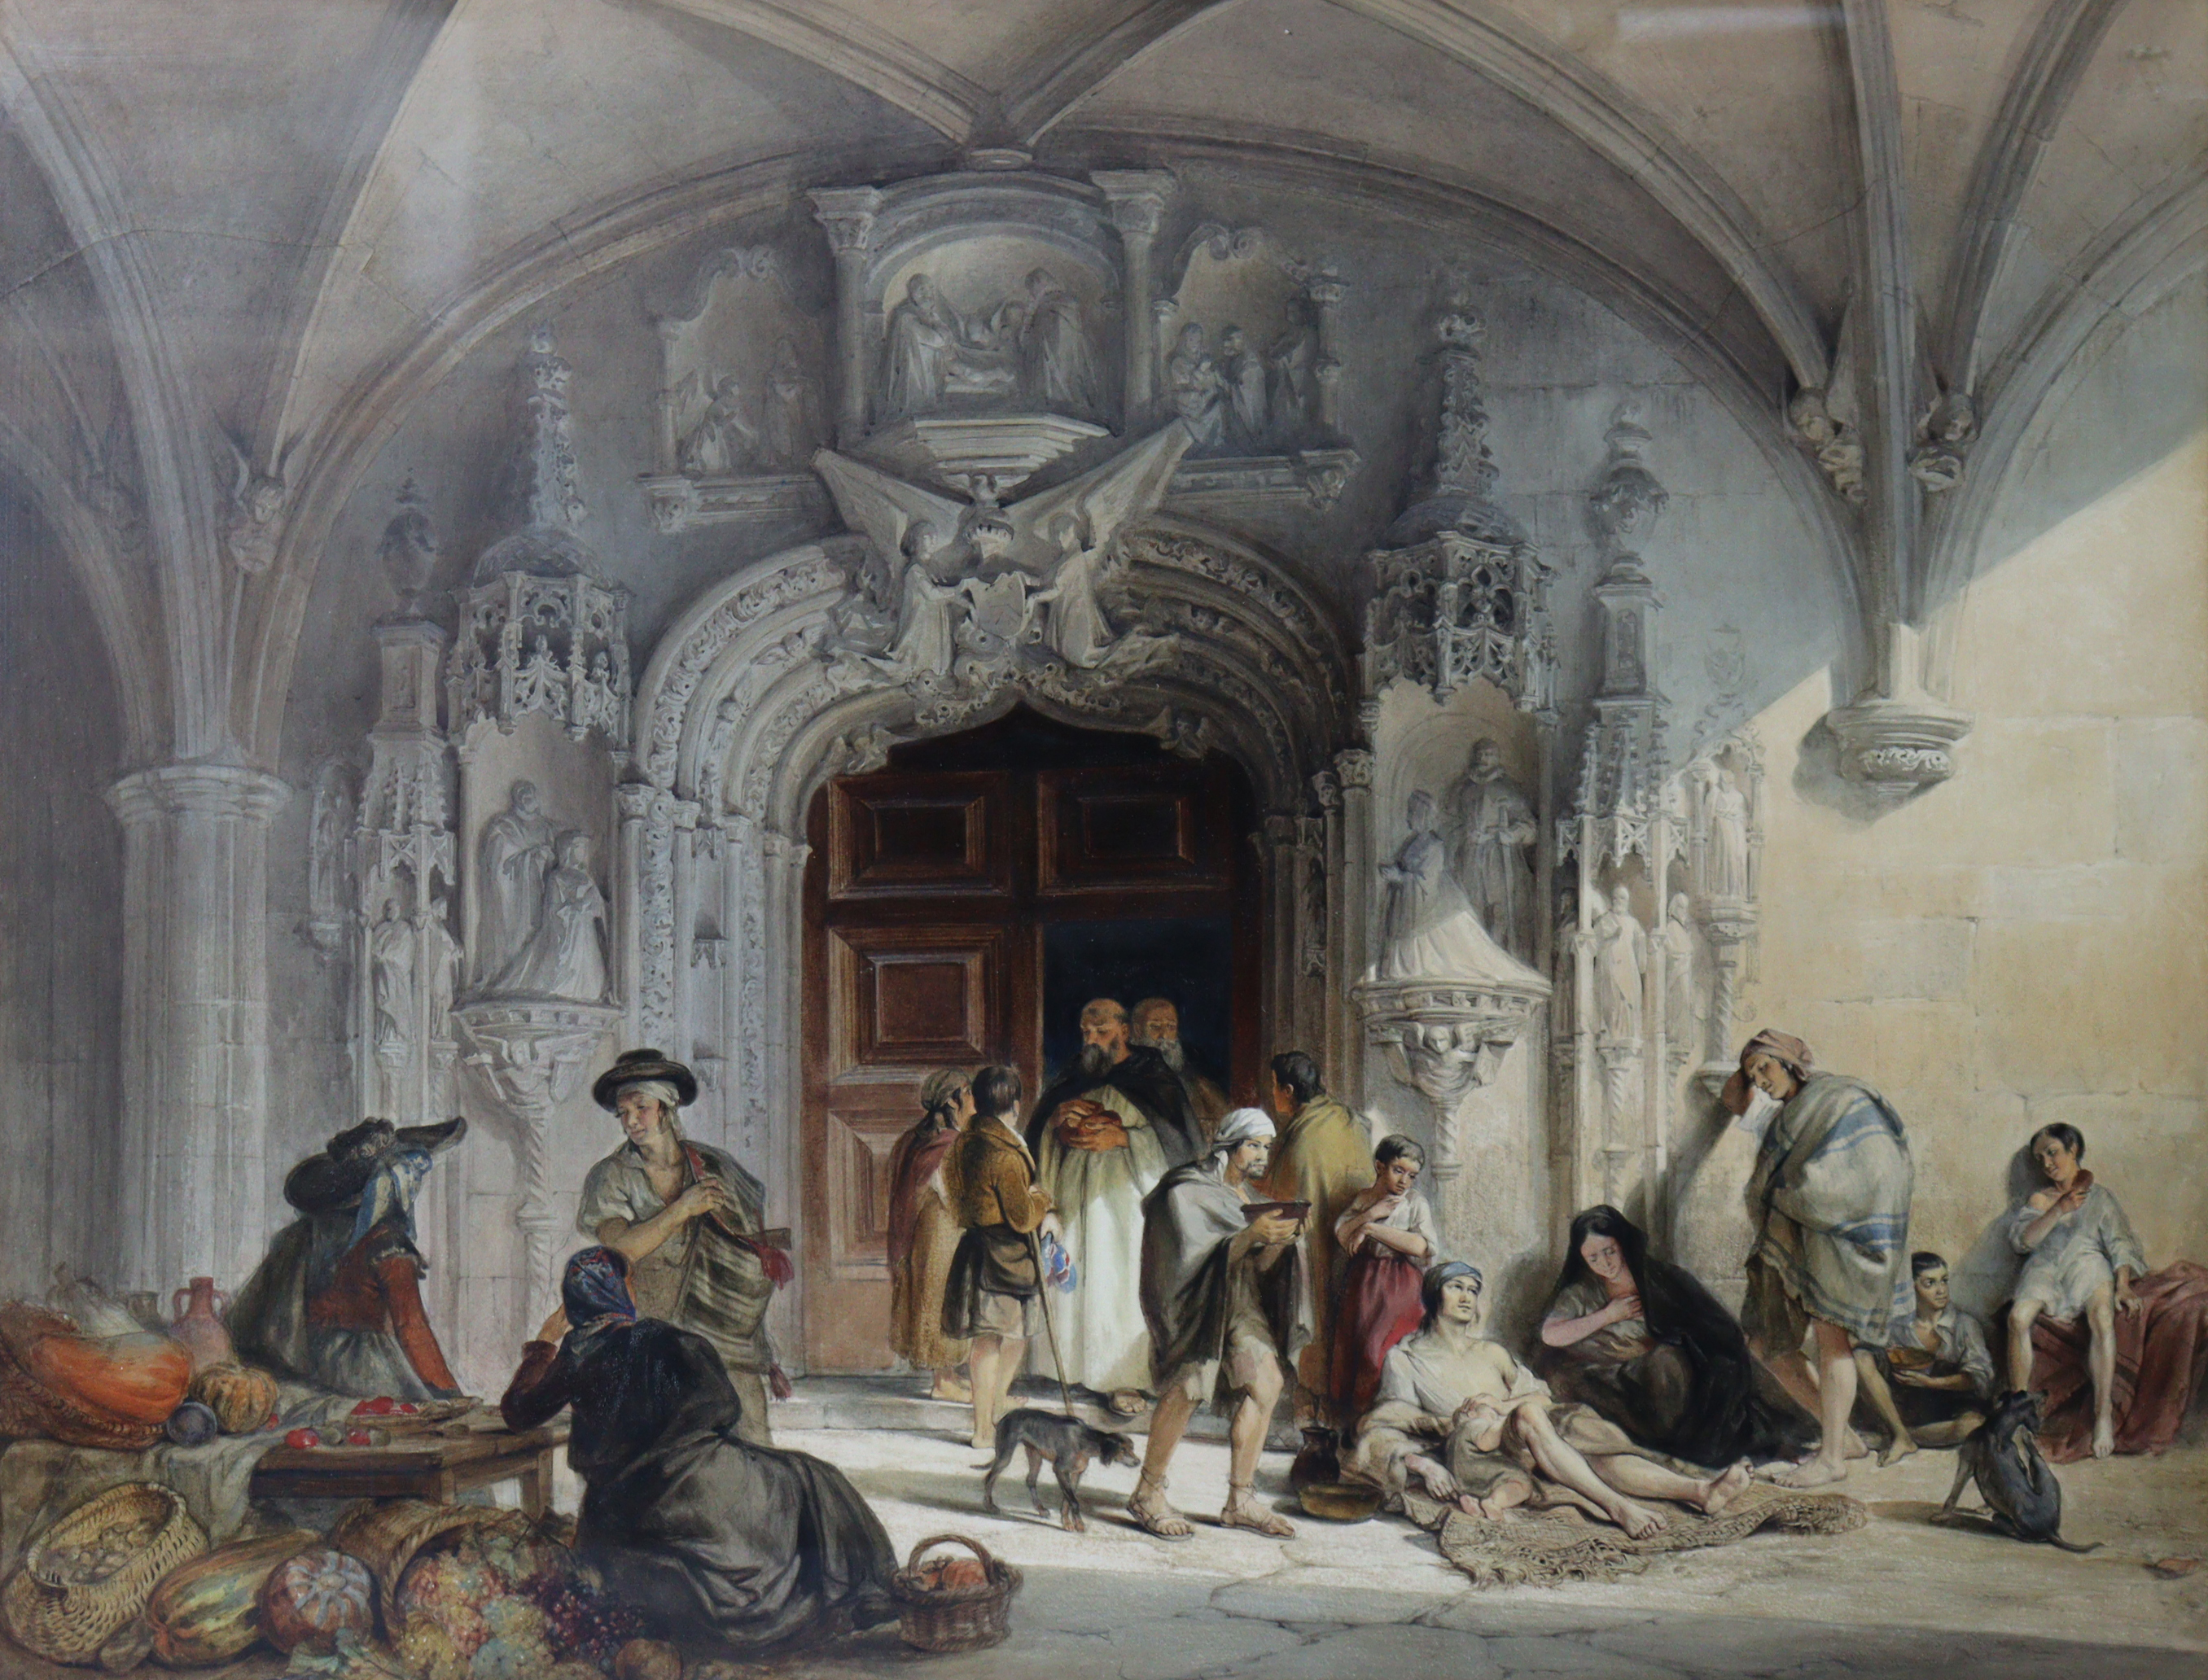 LOUIS HAGHE, P.R.I. (1806-1885). “Almsgiving, Spain”, signed & dated 1840, watercolour, 82cm x